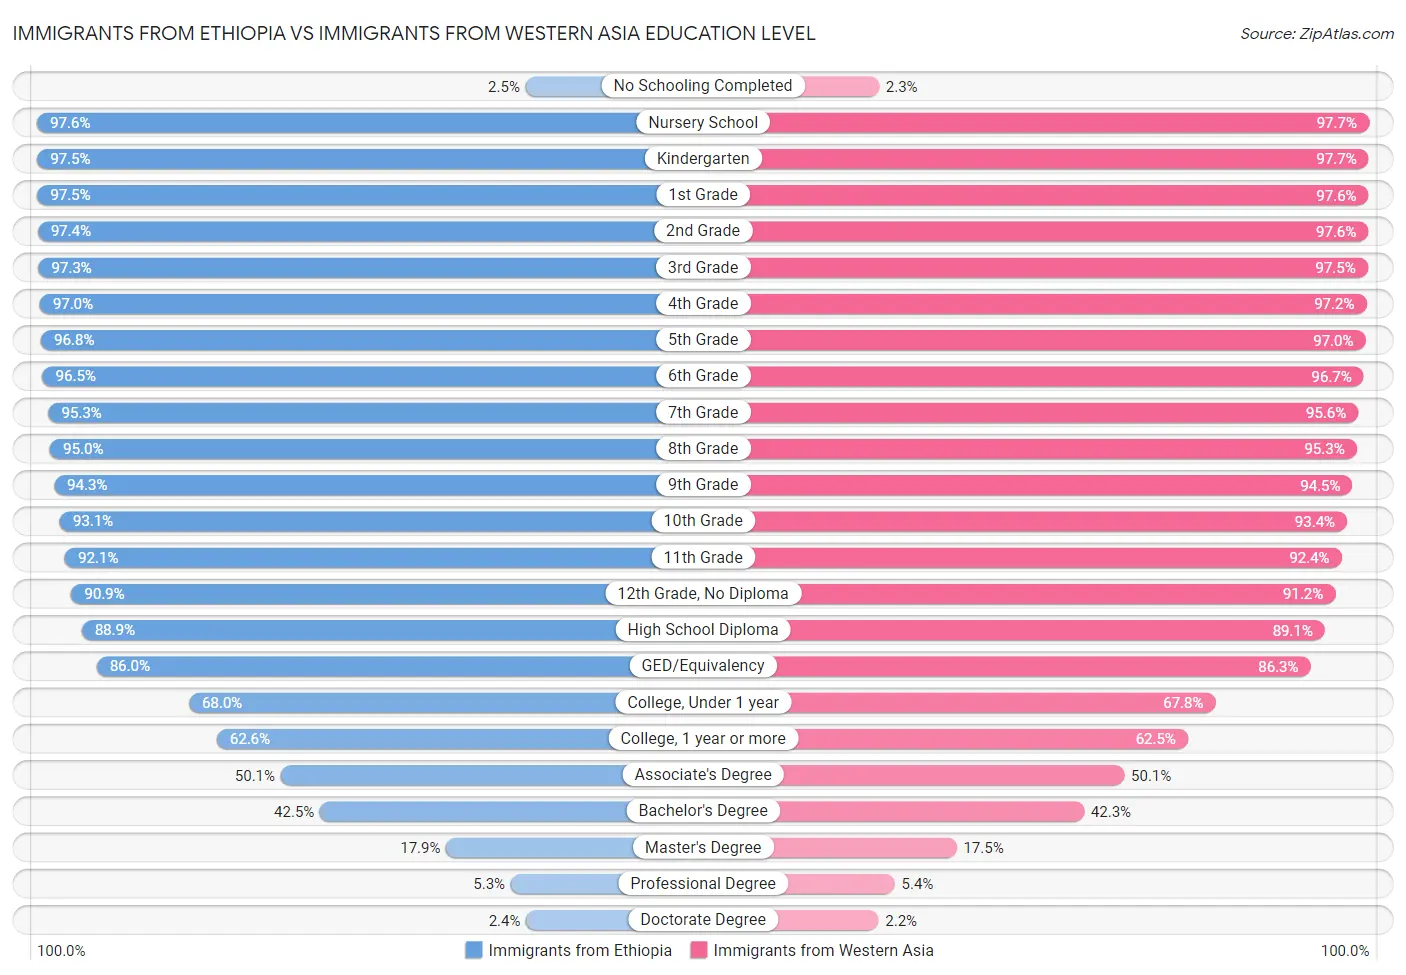 Immigrants from Ethiopia vs Immigrants from Western Asia Education Level